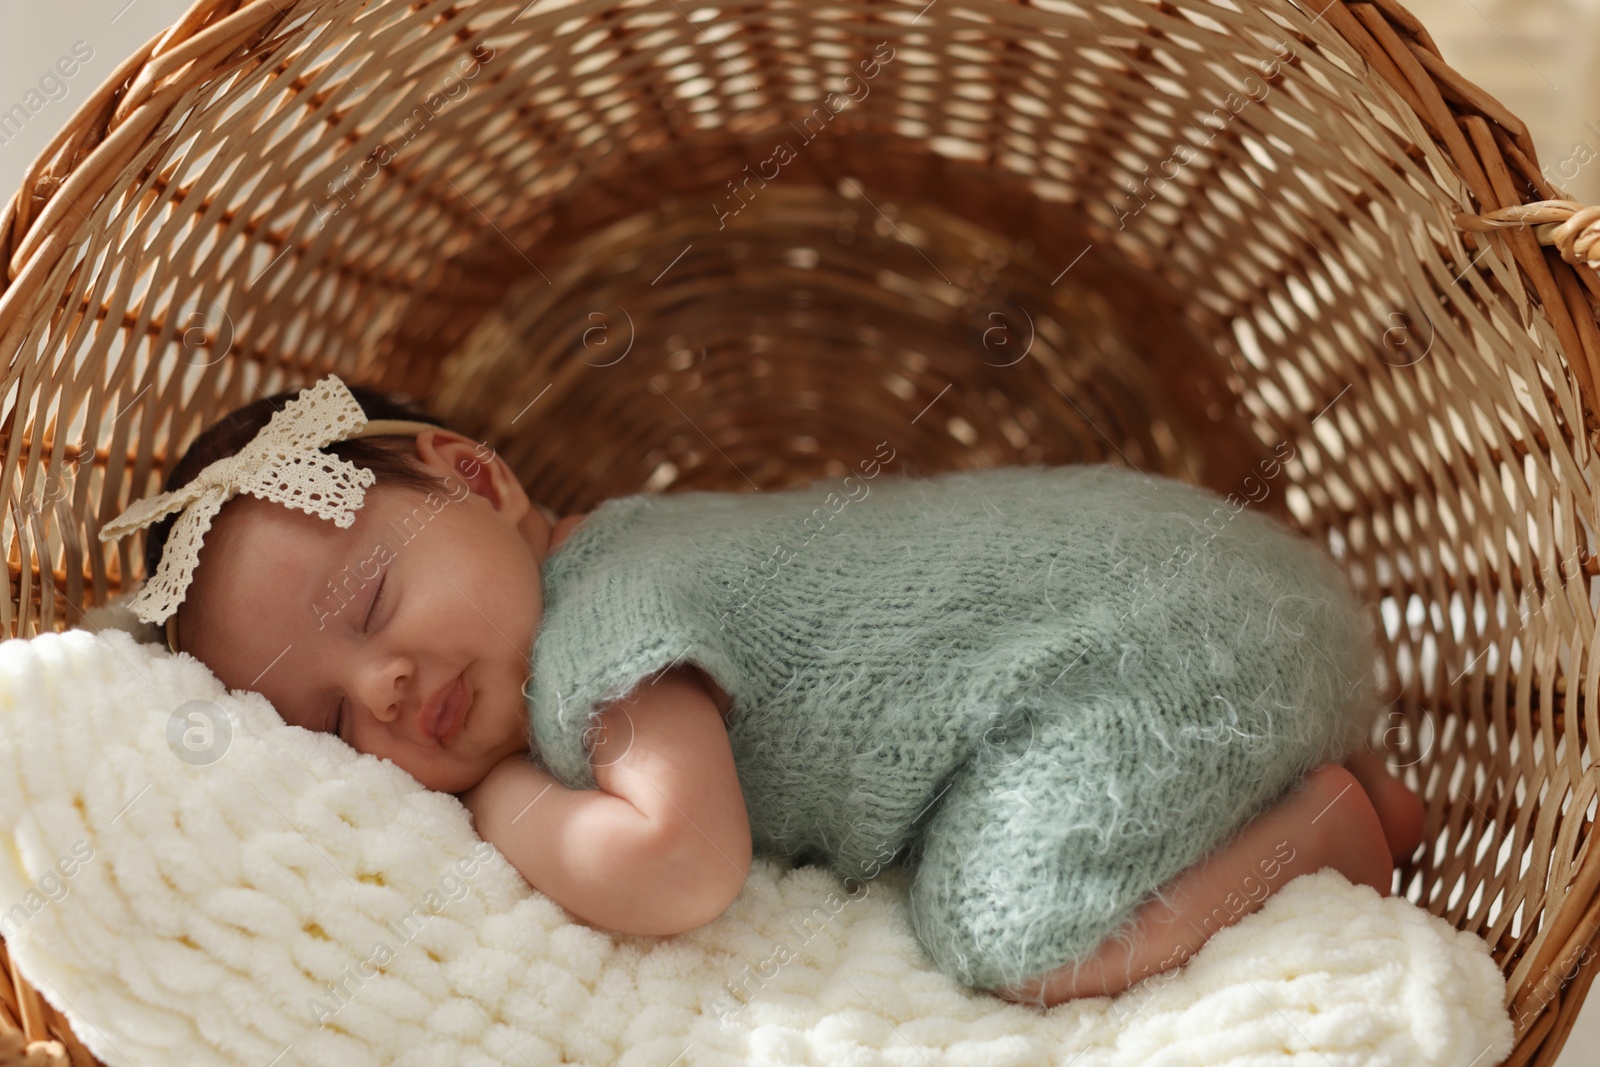 Photo of Adorable newborn baby sleeping in wicker basket with soft plaid